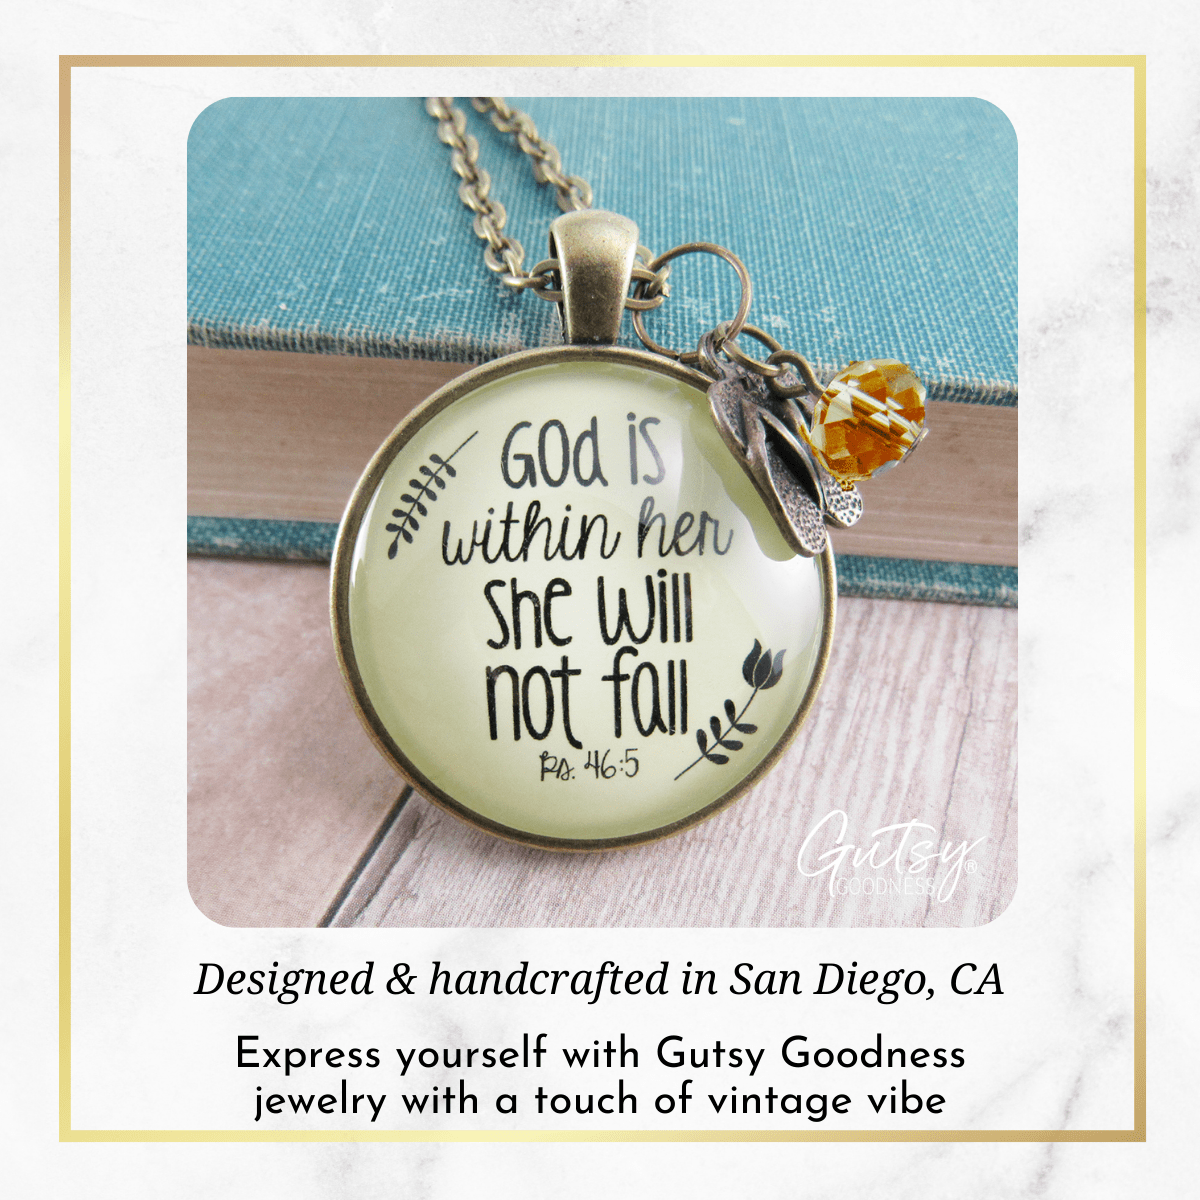 Gutsy Goodness God is Within Her Necklace Faith Psalm Trendy Jewelry Flip Flop Charm - Gutsy Goodness Handmade Jewelry;God Is Within Her Necklace Faith Psalm Trendy Jewelry Flip Flop Charm - Gutsy Goodness Handmade Jewelry Gifts